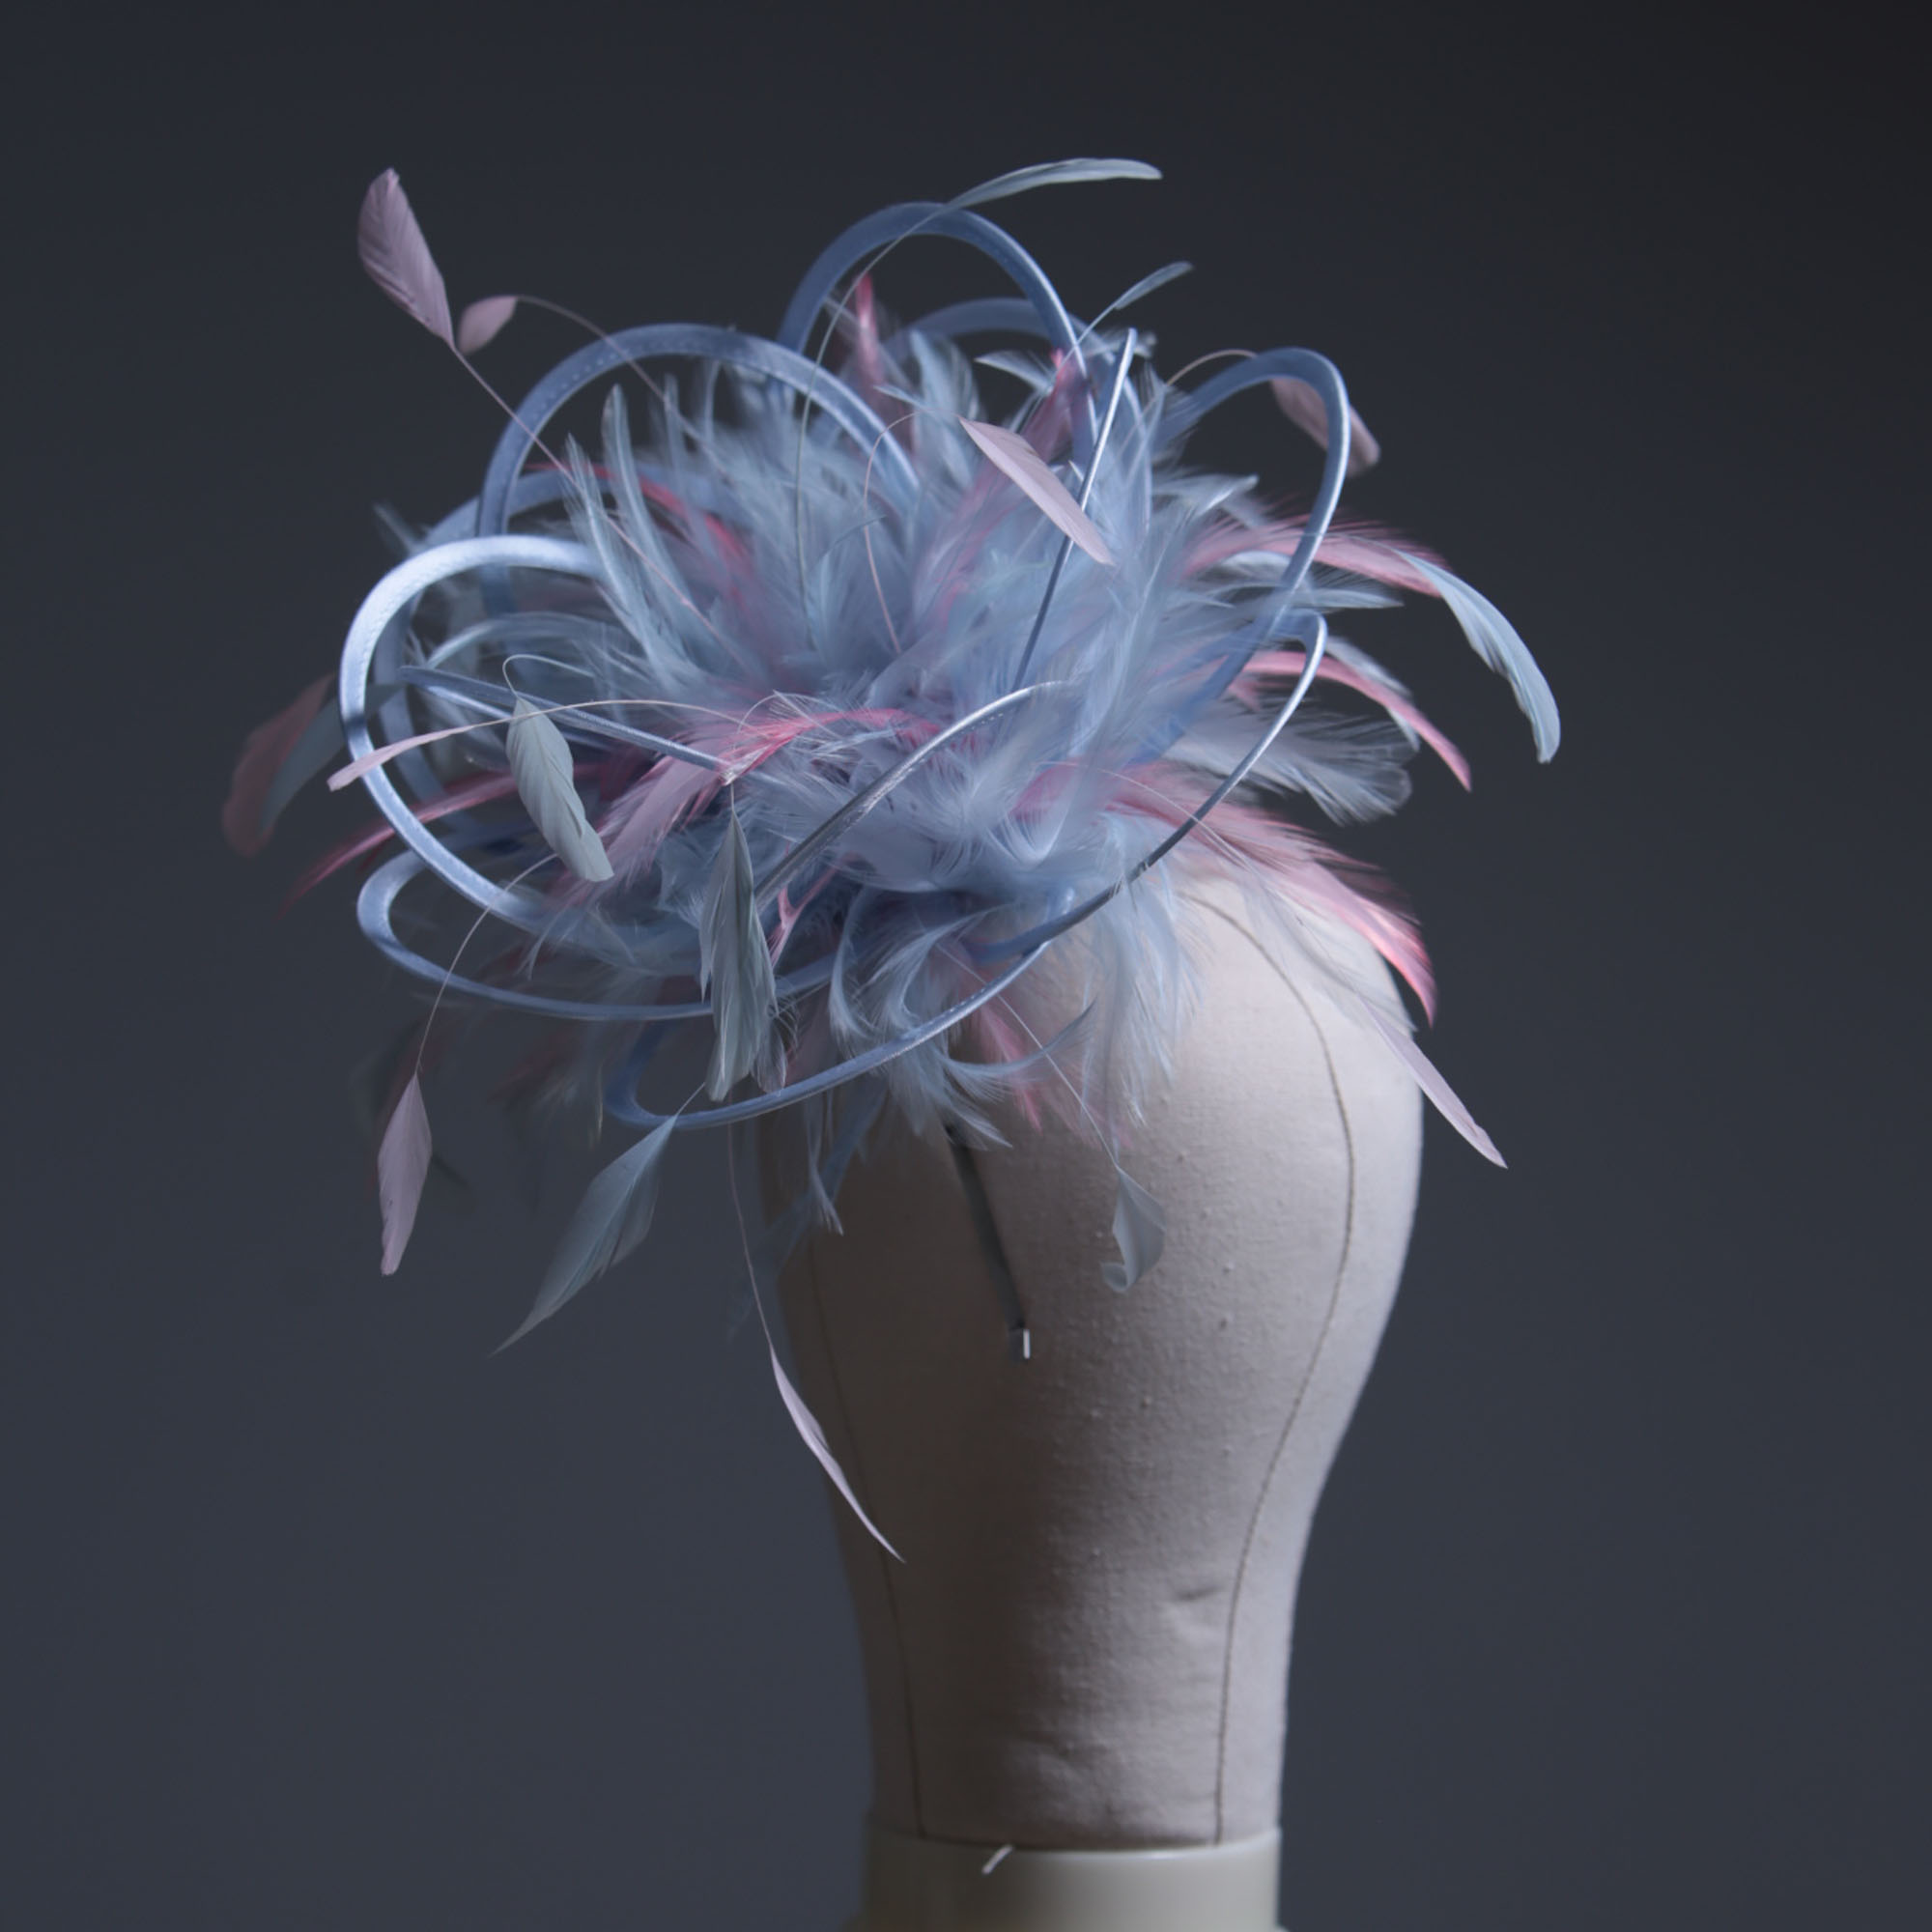 Ladies formal Baby Blue and Baby Pink Medium sized feather and satin fascinator hat. Suitable for a wedding or ladies day at the races